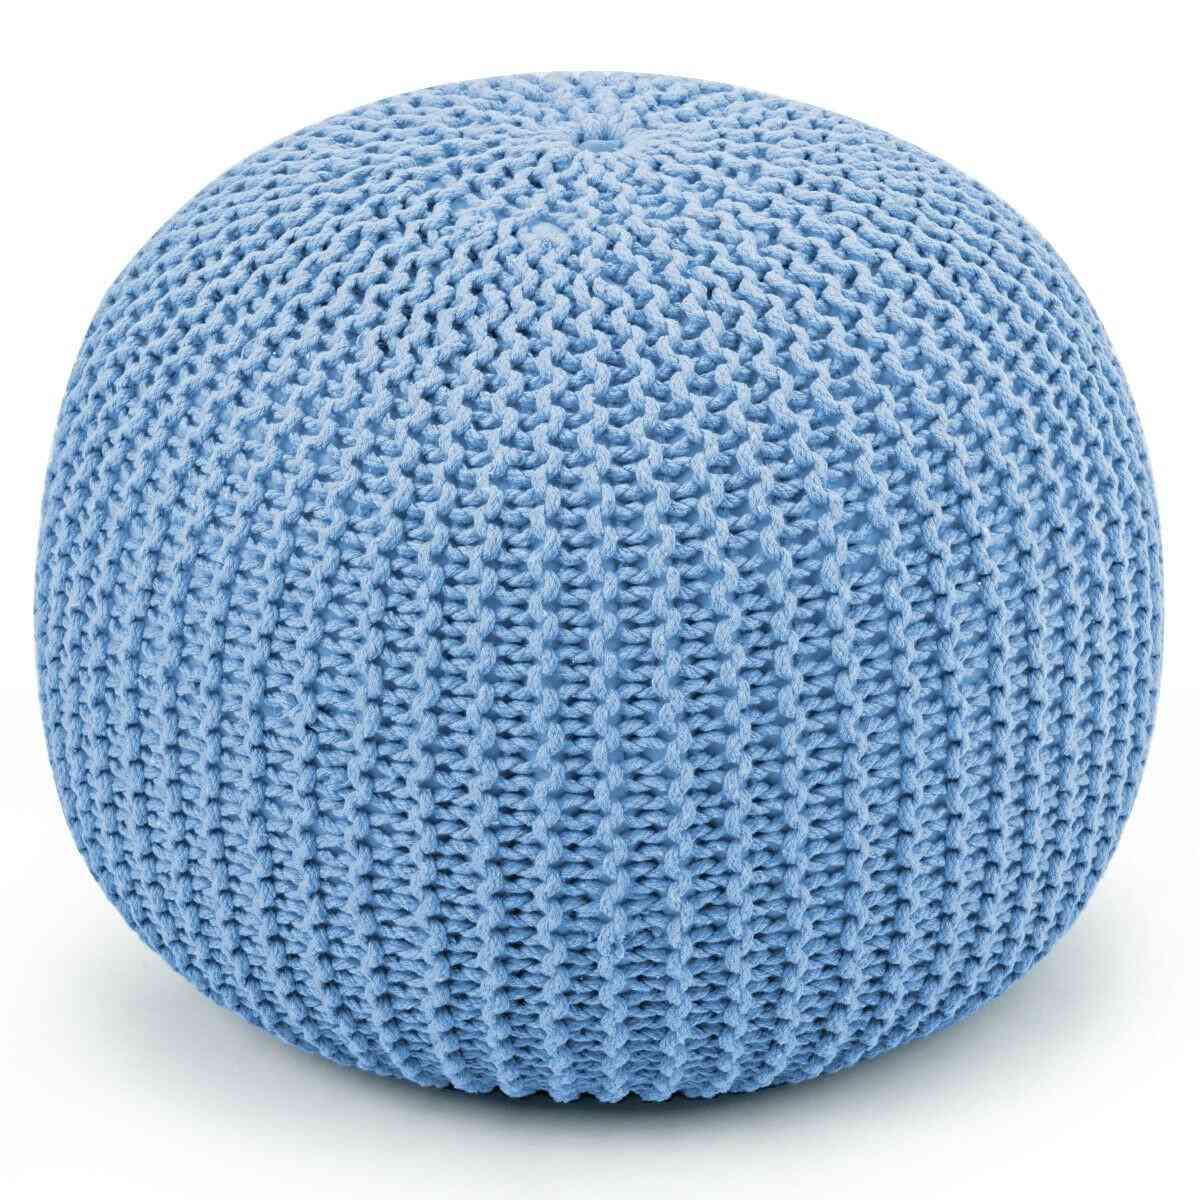 Cotton Exquisite Hand Knitted Pouf Floor Seating